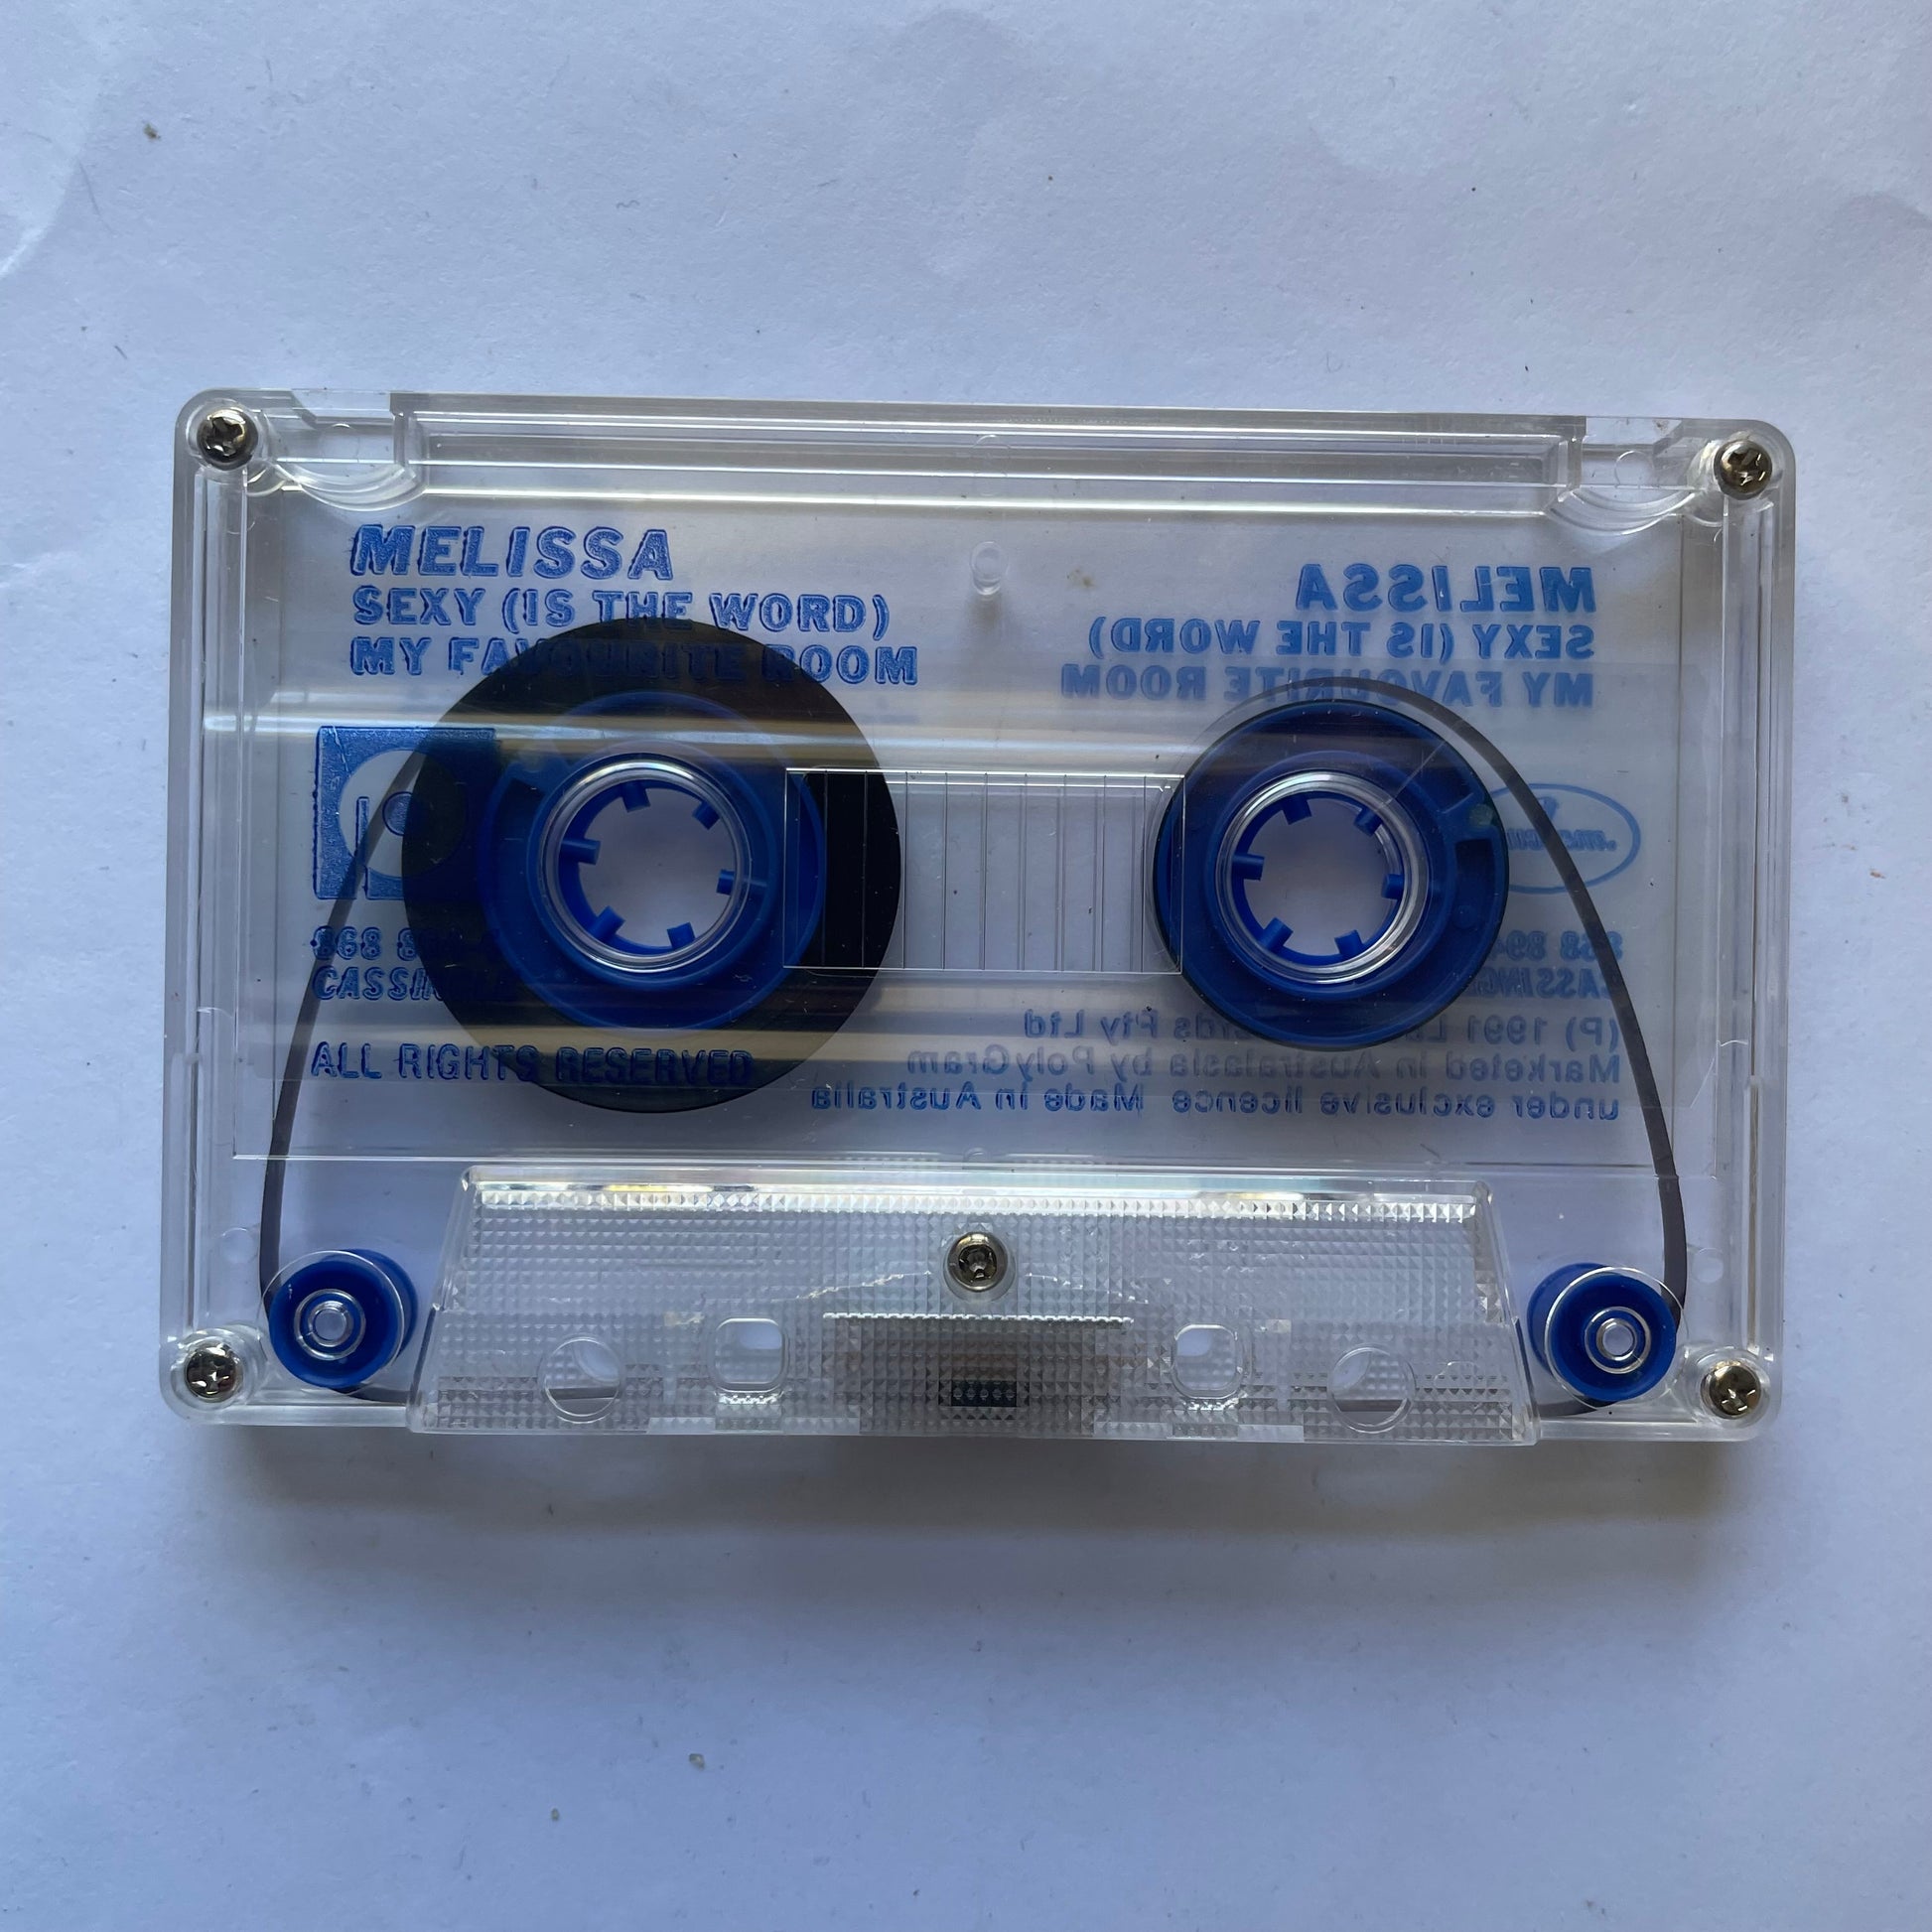 Tape Cassette Melissa sexy is the word 1991 side 2 